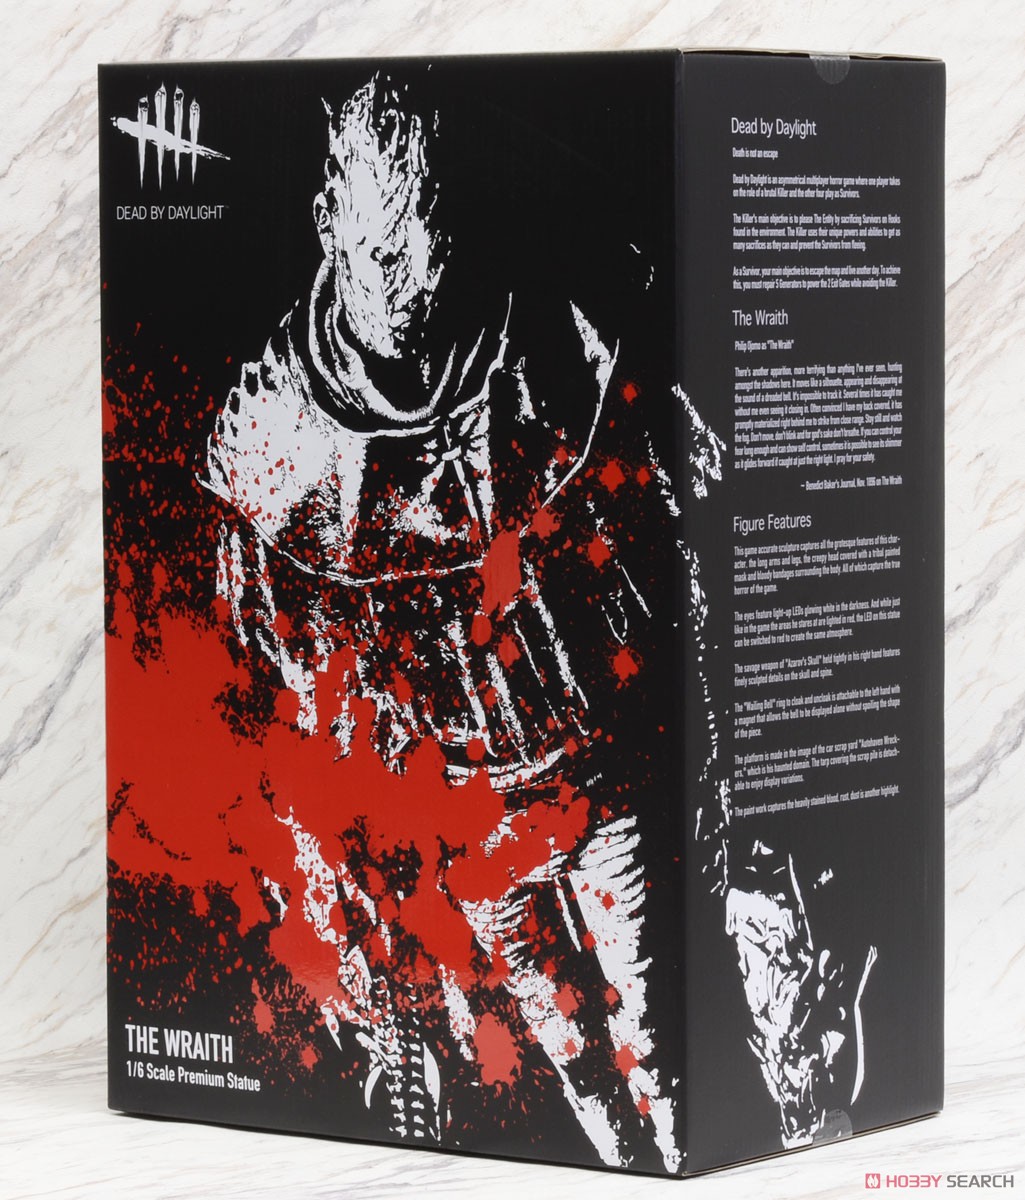 Dead by Daylight The Wraith 1/6 Scale Premium Statue (Completed) Package1